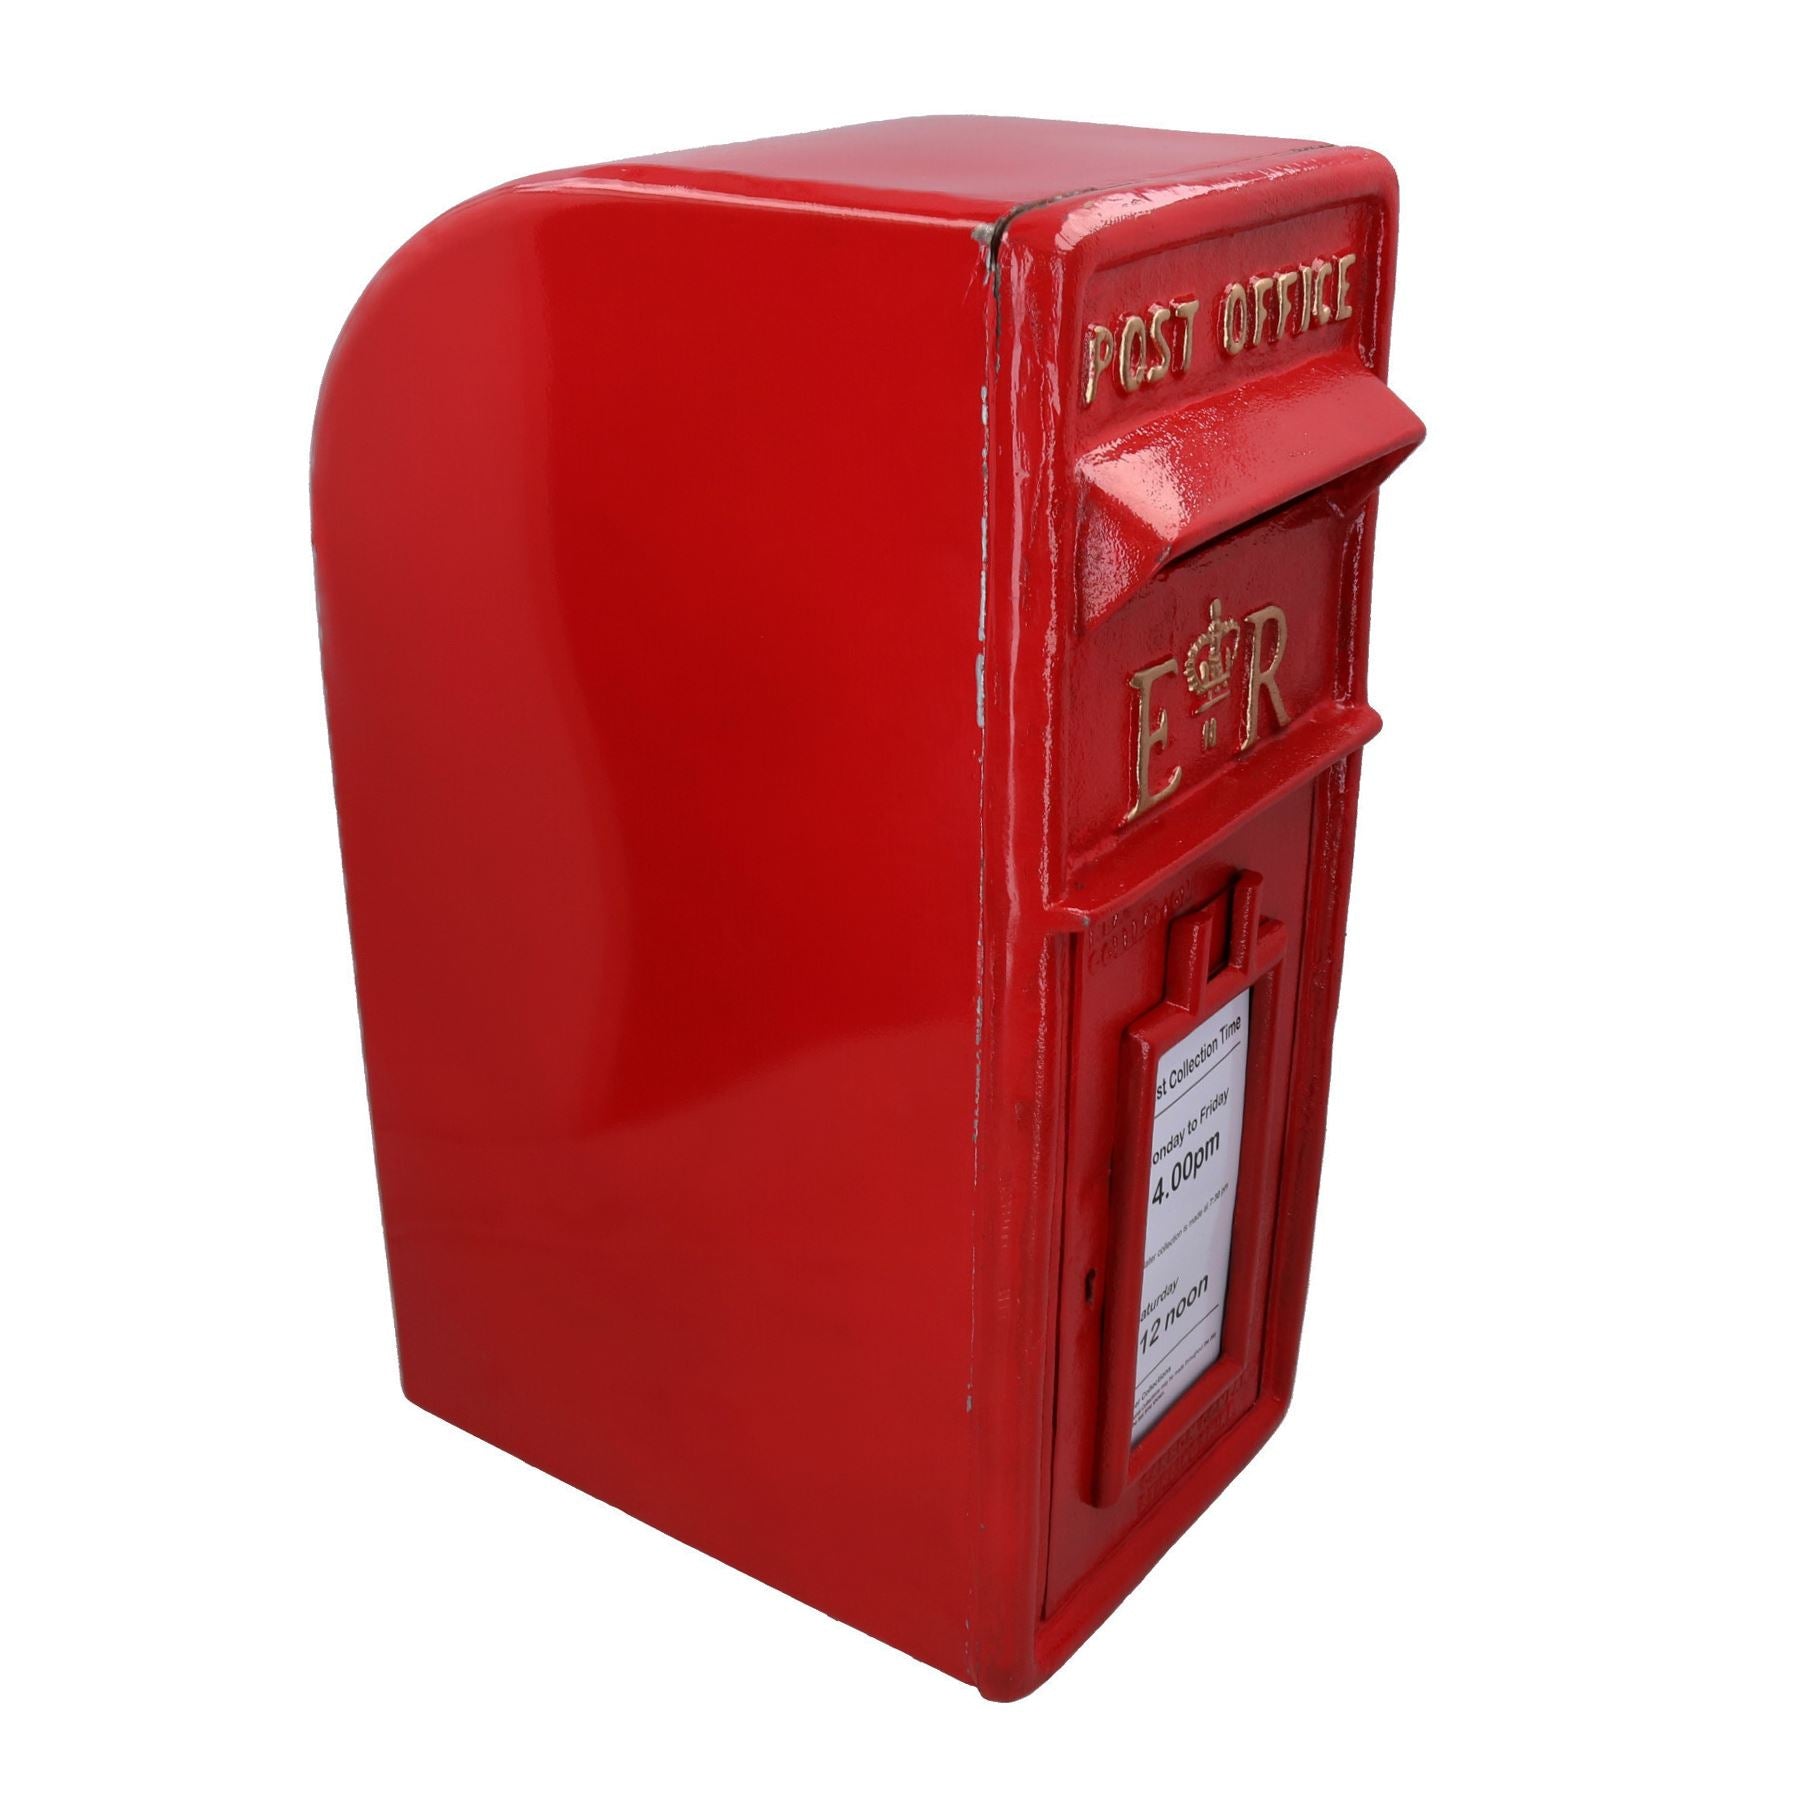 ER Royal Mail Post Mail Letter Box Replica Cast Iron Red Lockable Damaged Paint